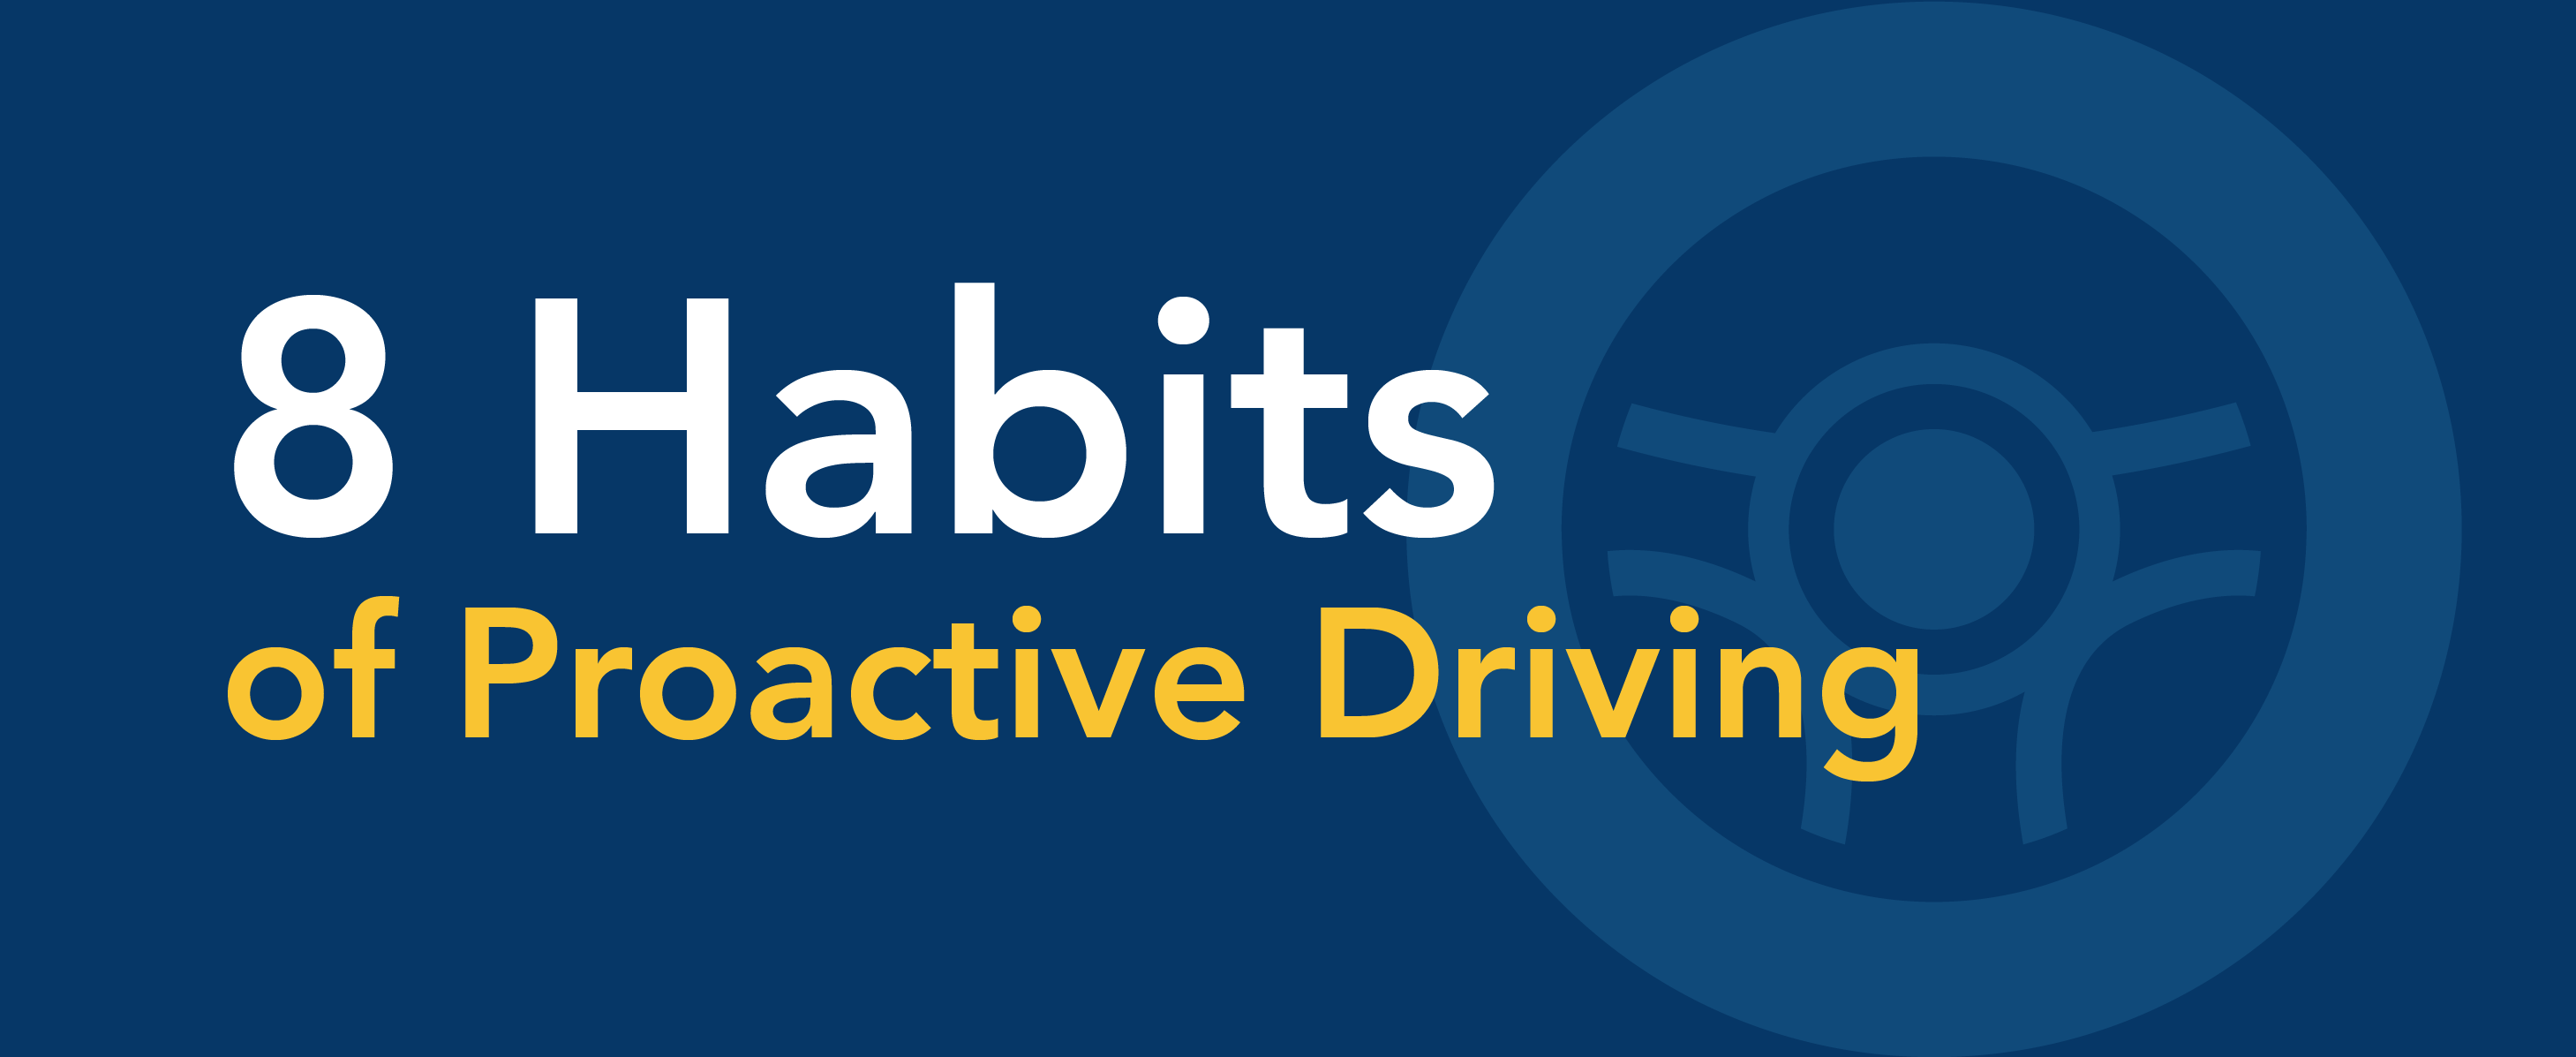 8 habits of proactive driving.